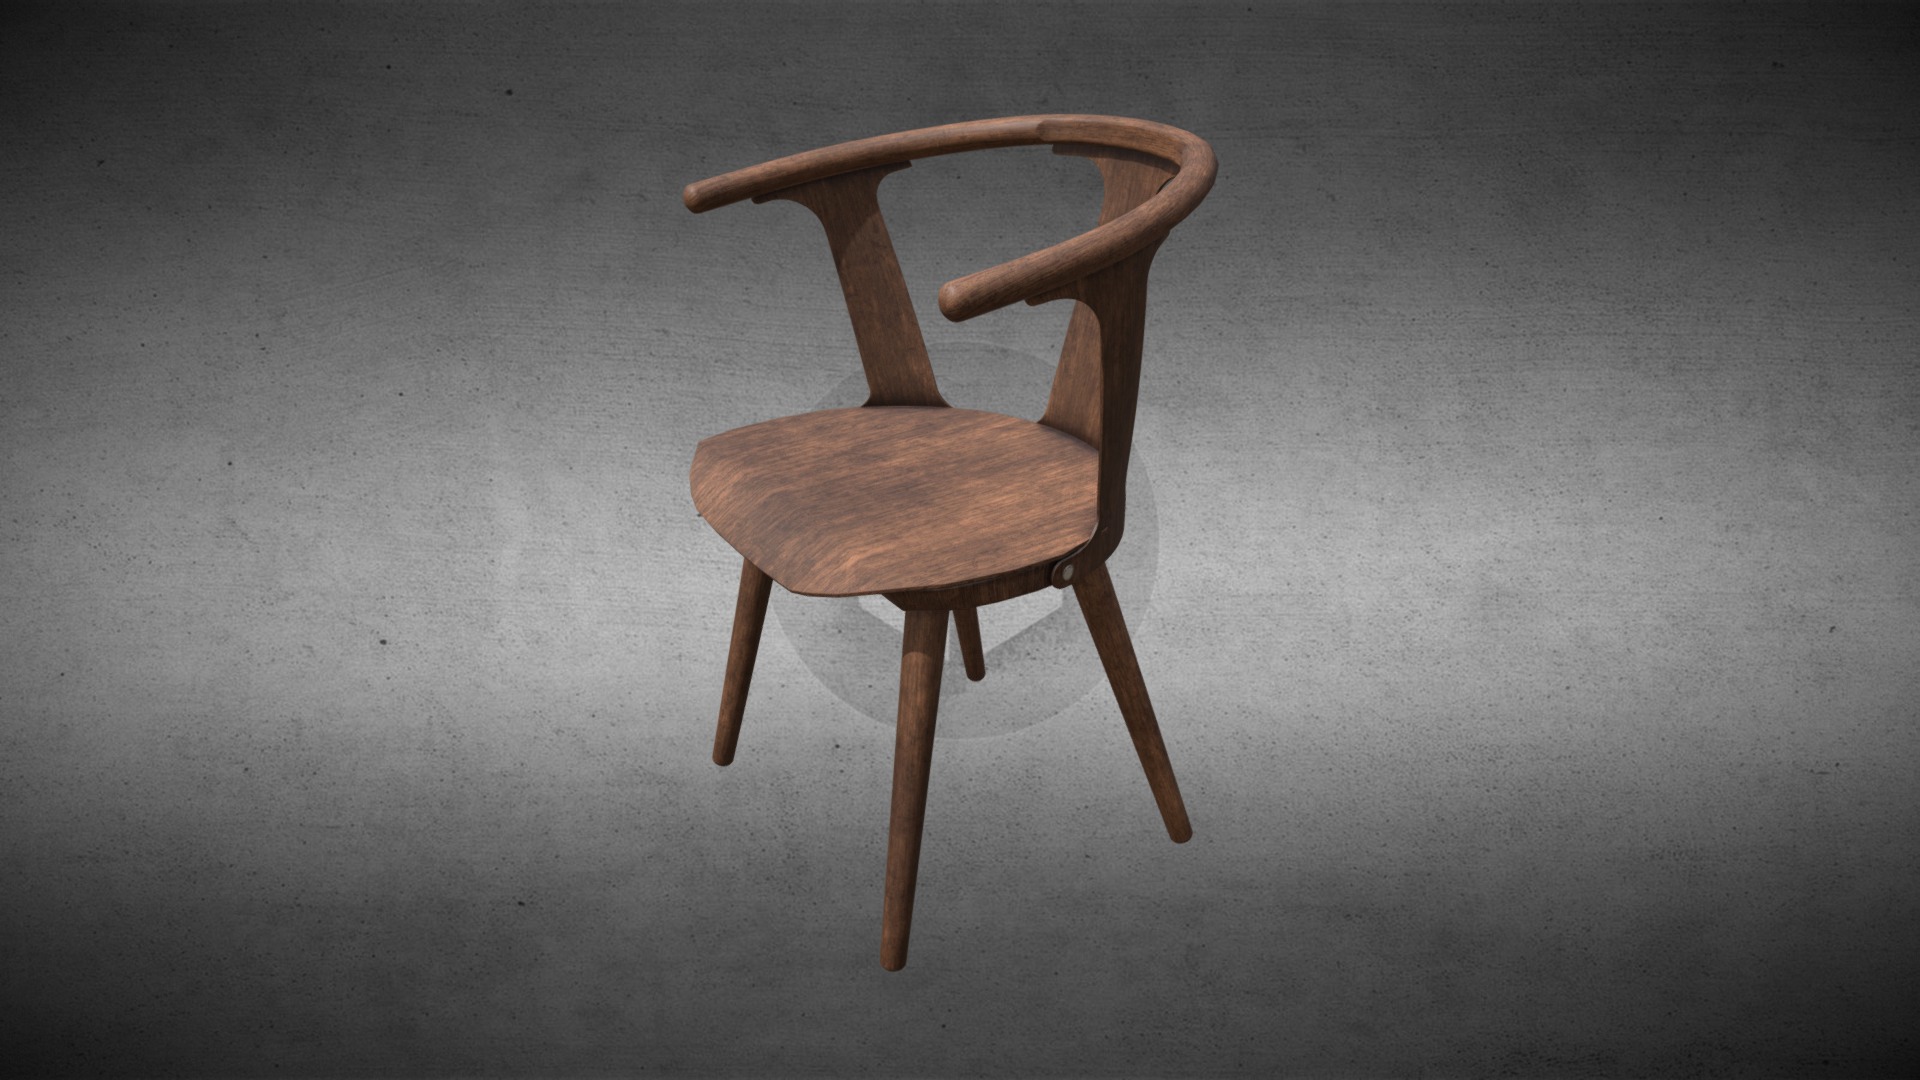 3D model PBR Chair - This is a 3D model of the PBR Chair. The 3D model is about a wooden chair on a carpet.